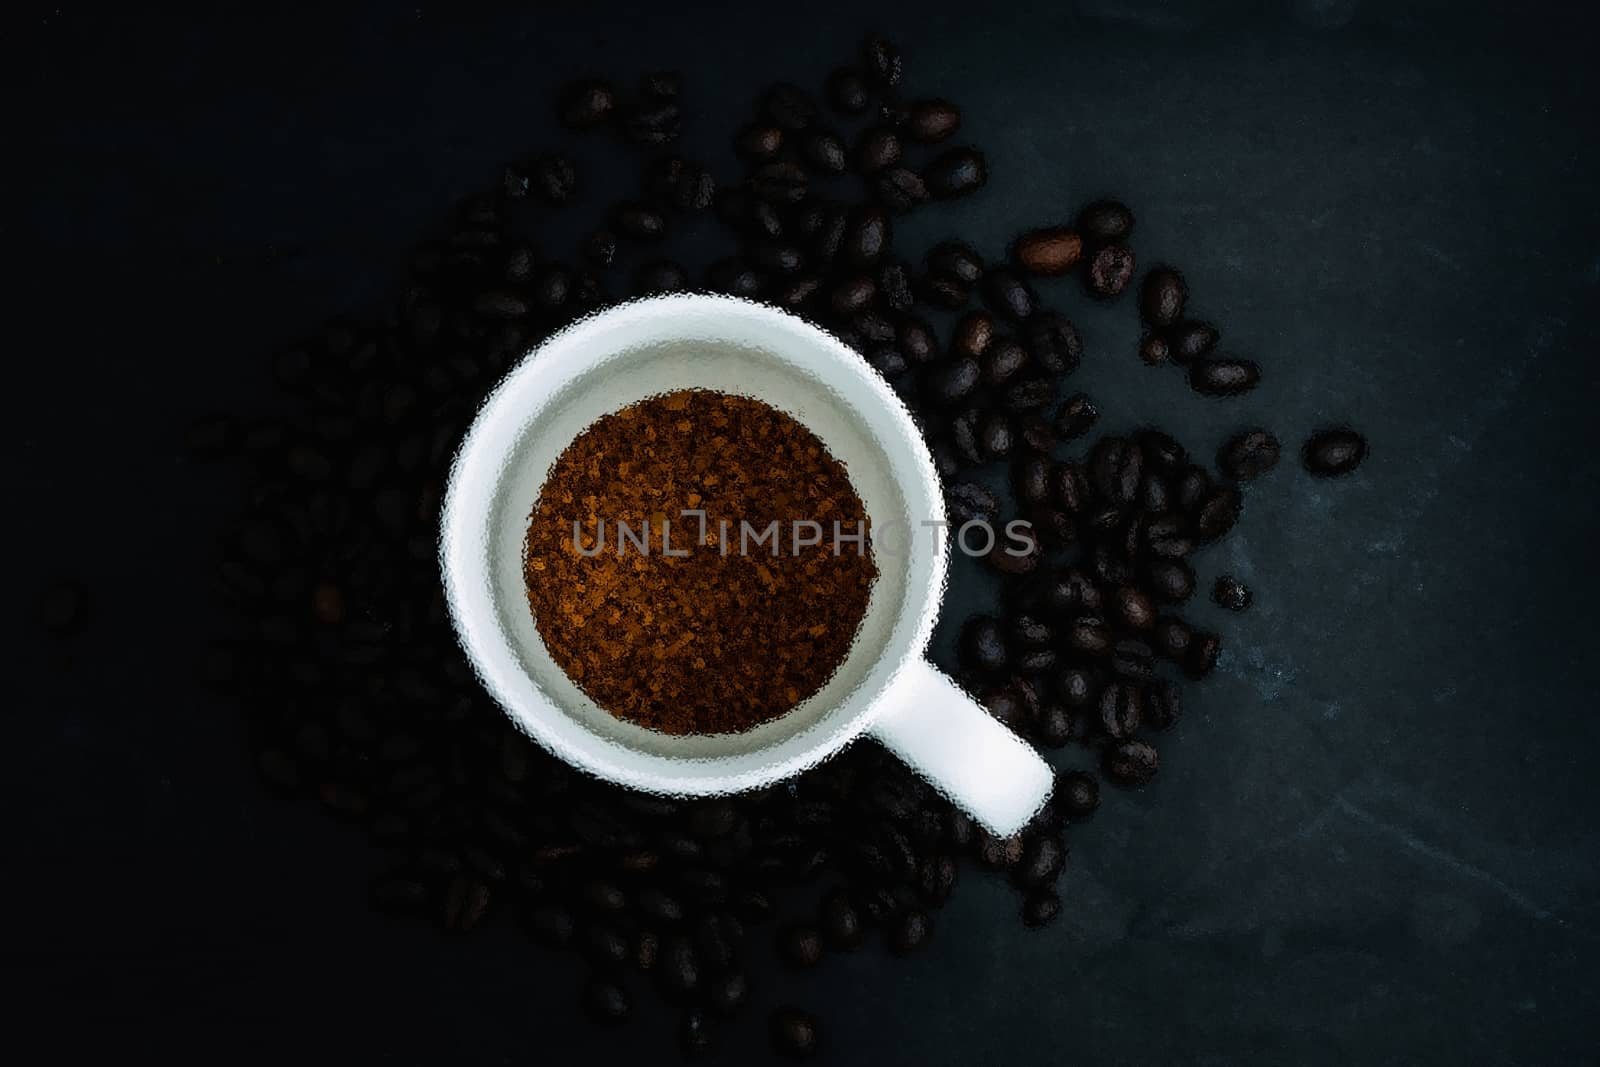 Abstract frosted glass image on Top view of Instant coffee in cup on dark background with beans by peerapixs